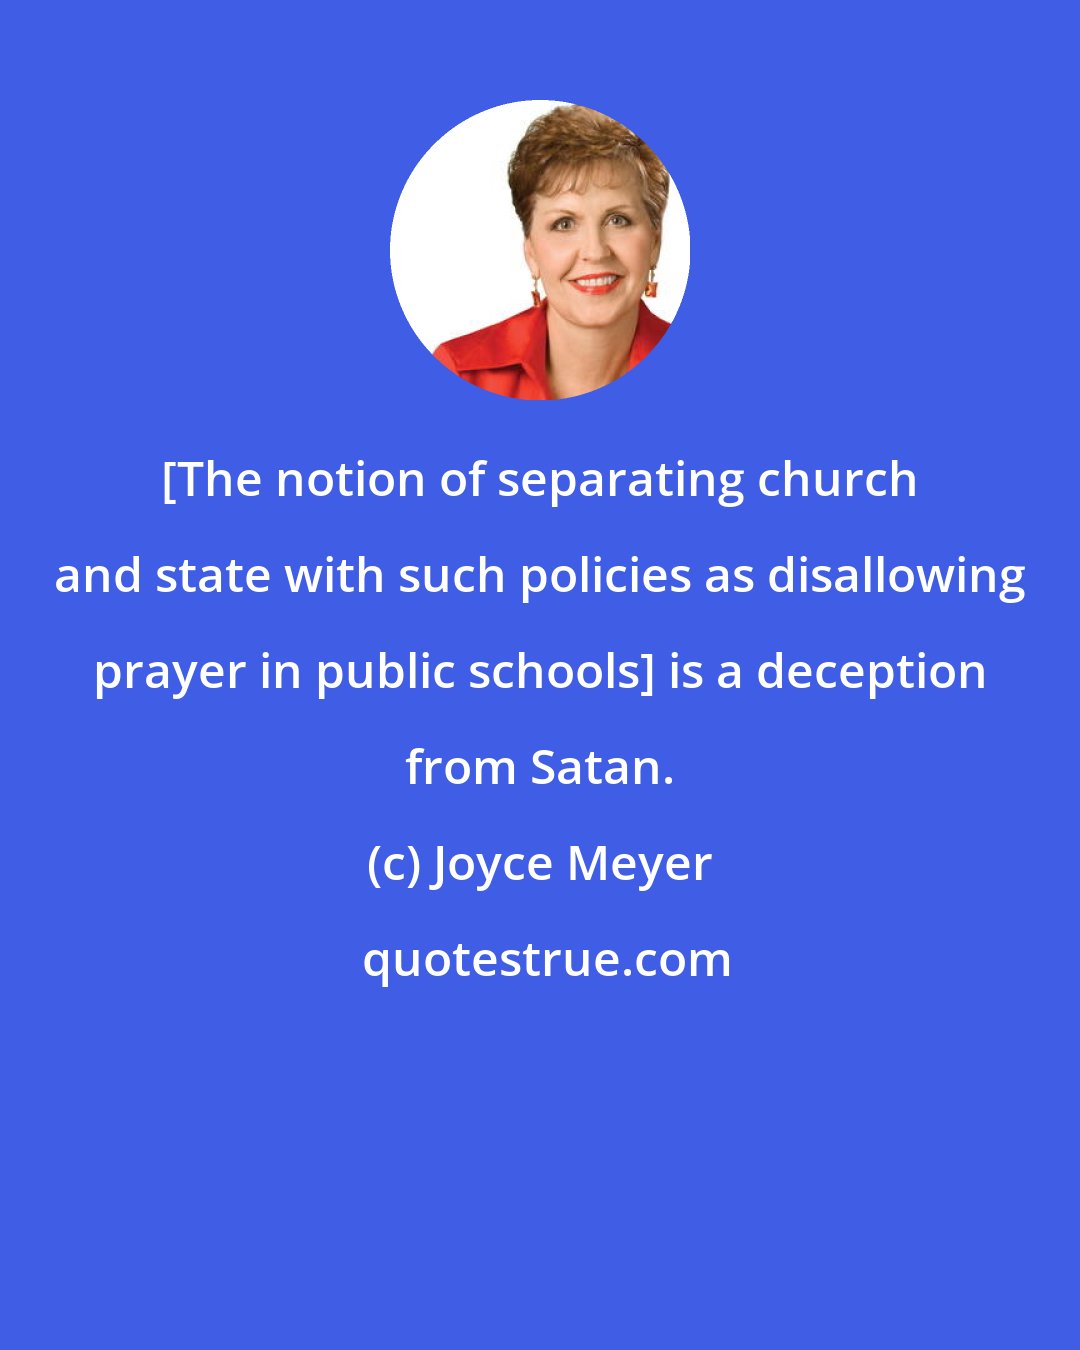 Joyce Meyer: [The notion of separating church and state with such policies as disallowing prayer in public schools] is a deception from Satan.